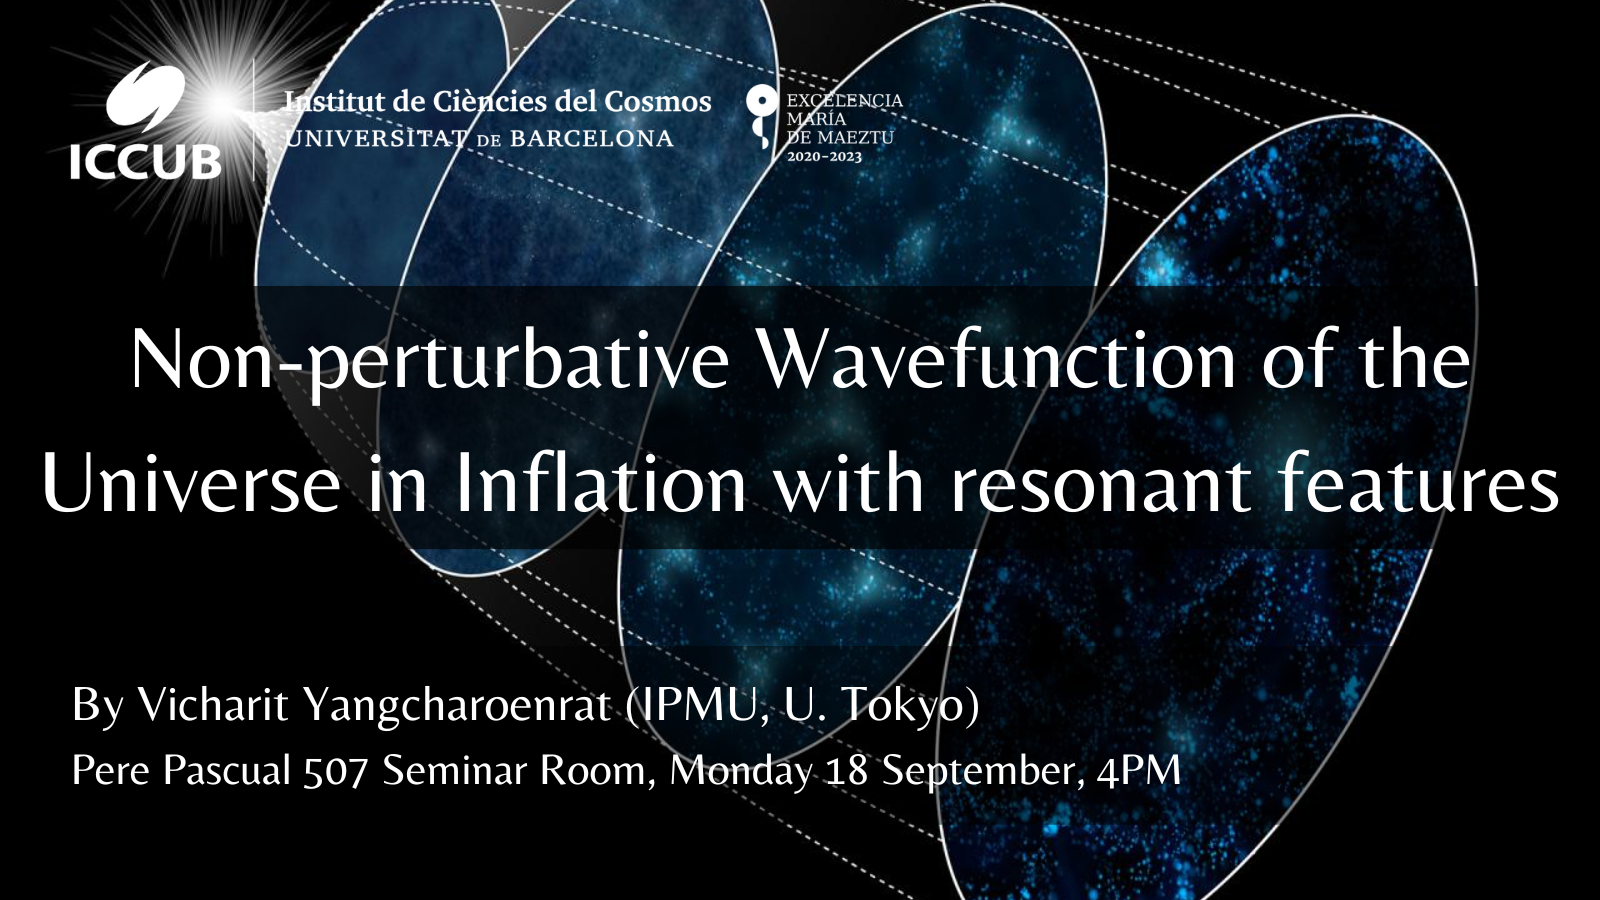 Non-perturbative Wavefunction of the Universe in Inflation with (Resonant) features